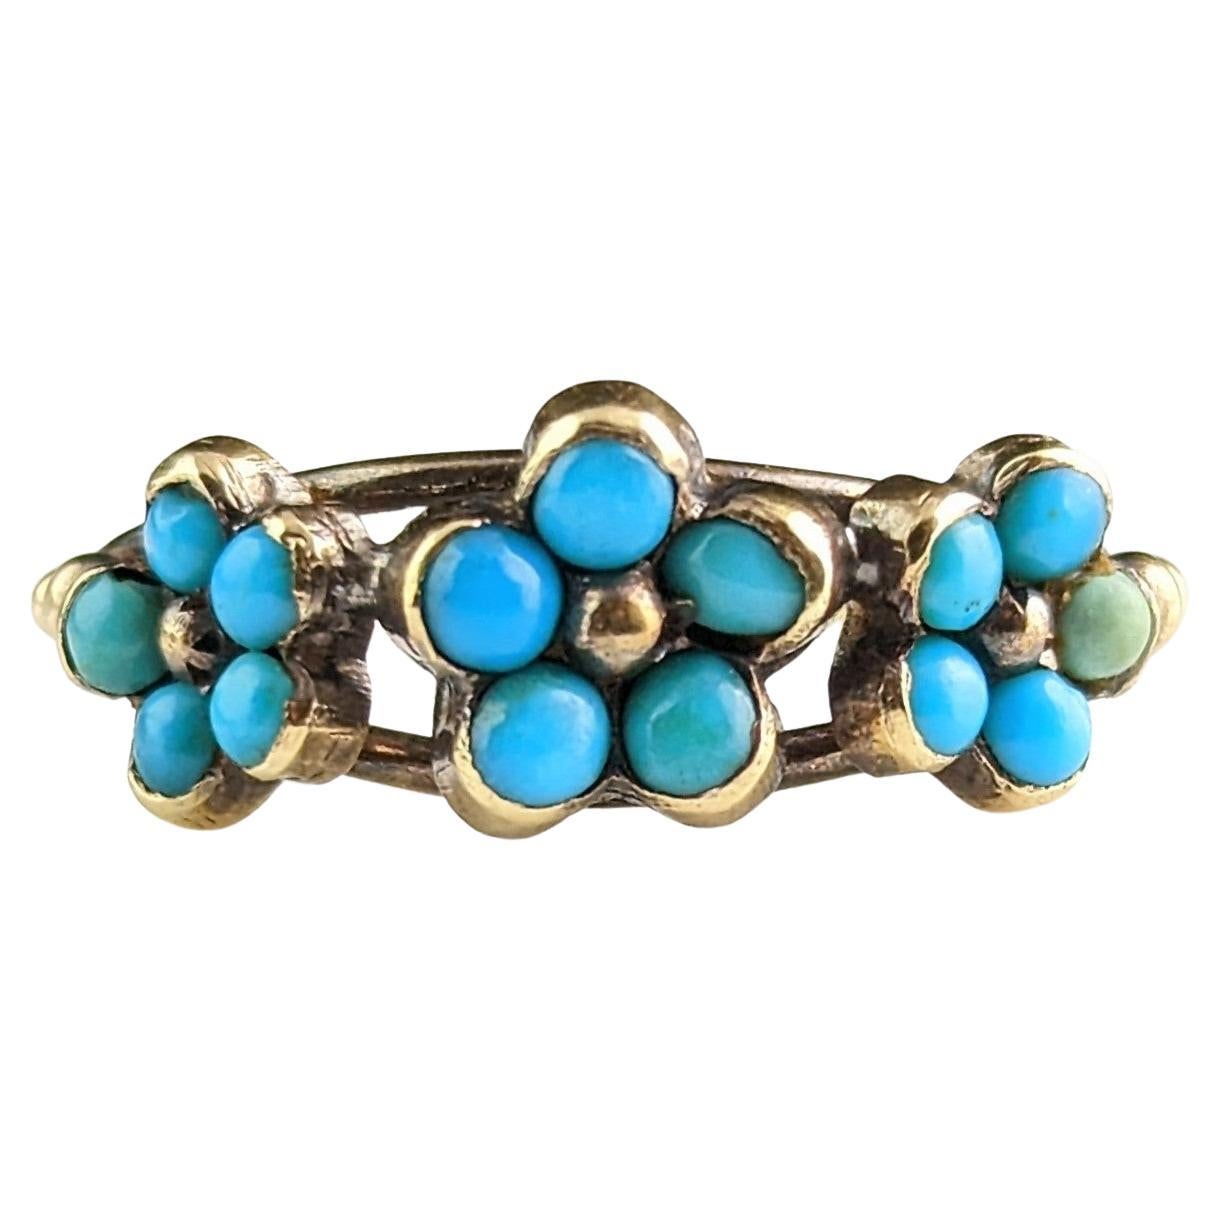 Antique Georgian Triple Flower Ring, Forget Me Not, 18k Gold and Turquoise